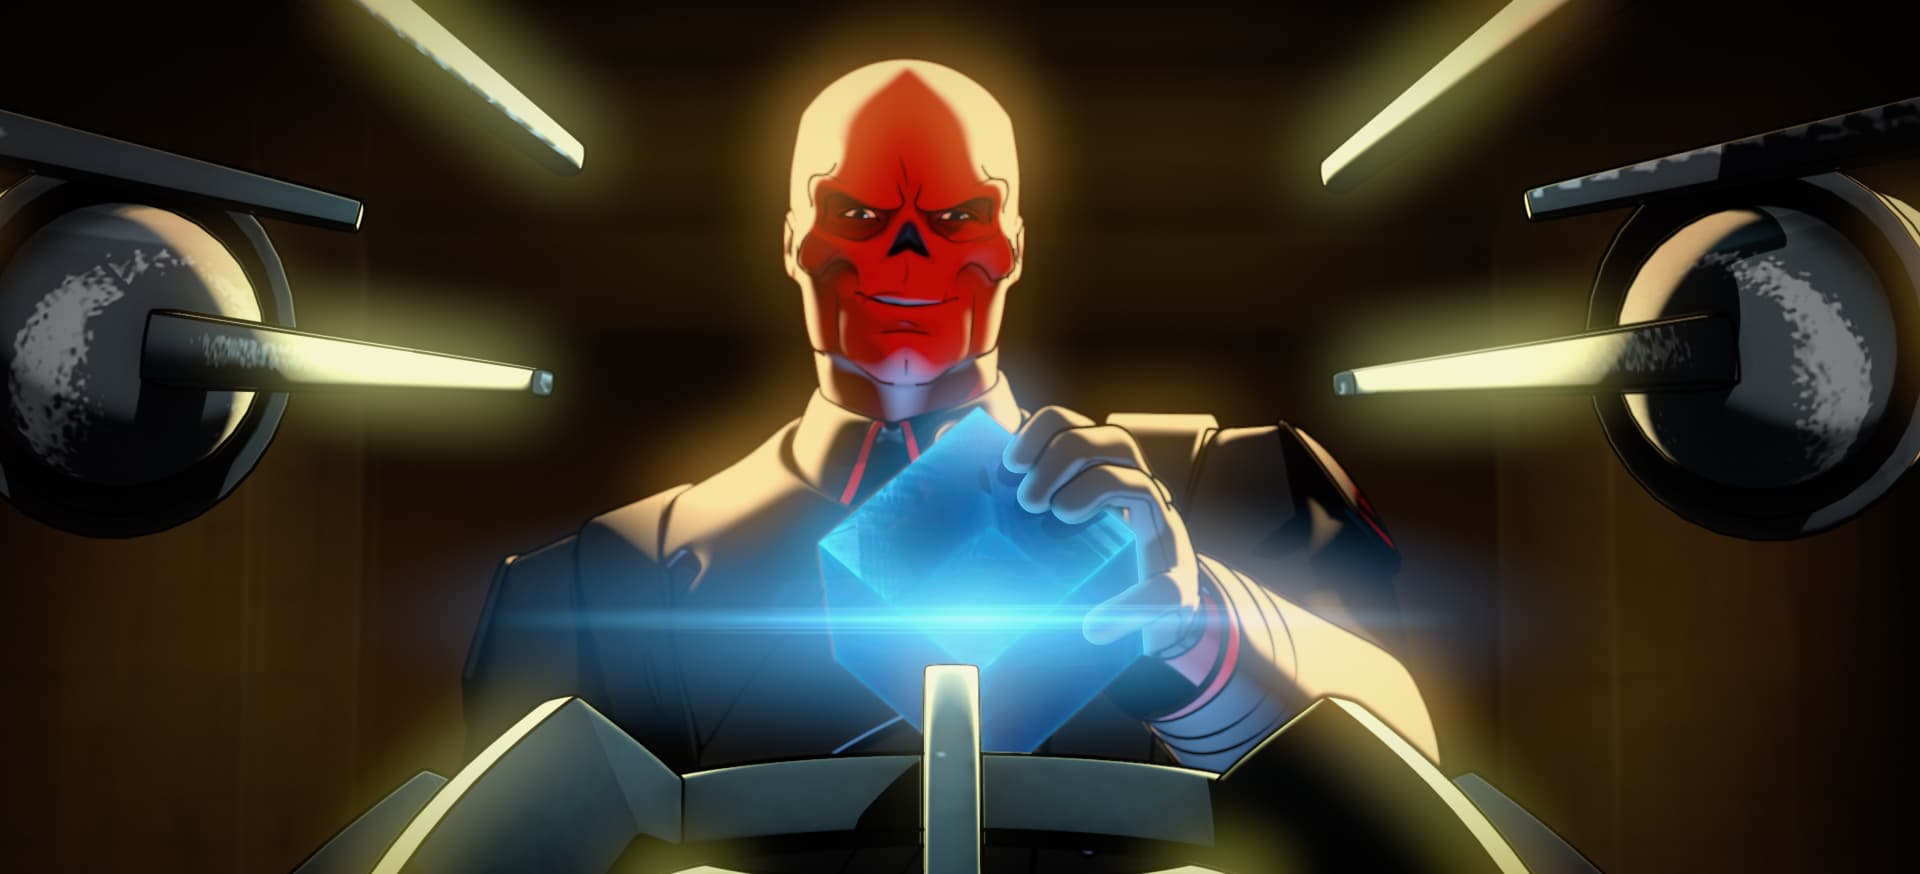 Red Skull | What If...?